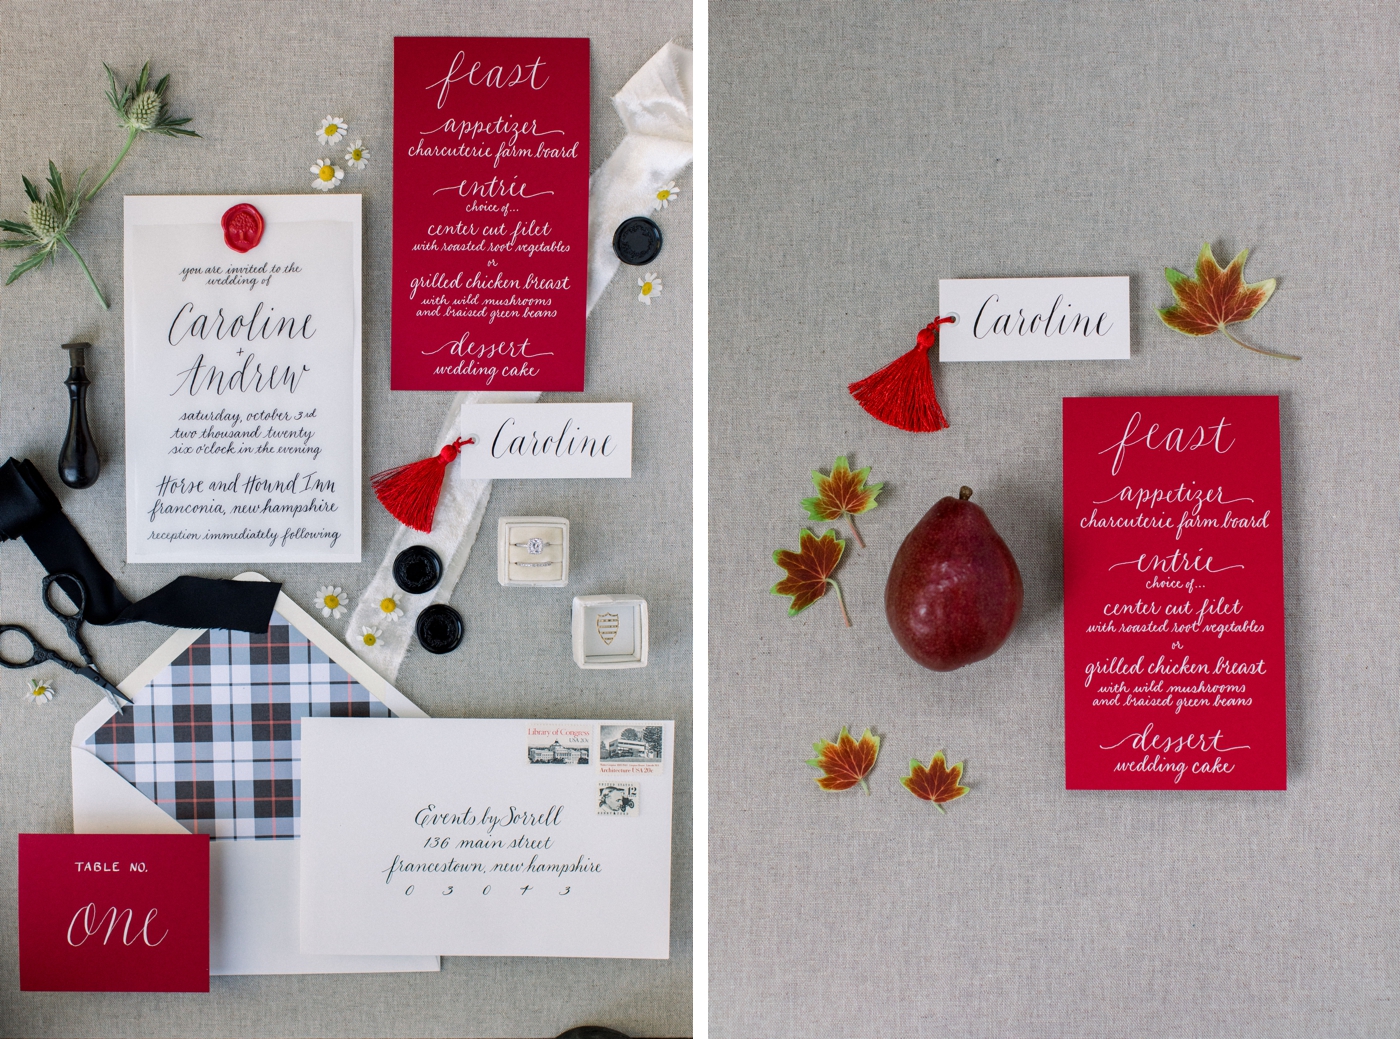 Tartan inspired wedding invitation by Southern Calligraphy